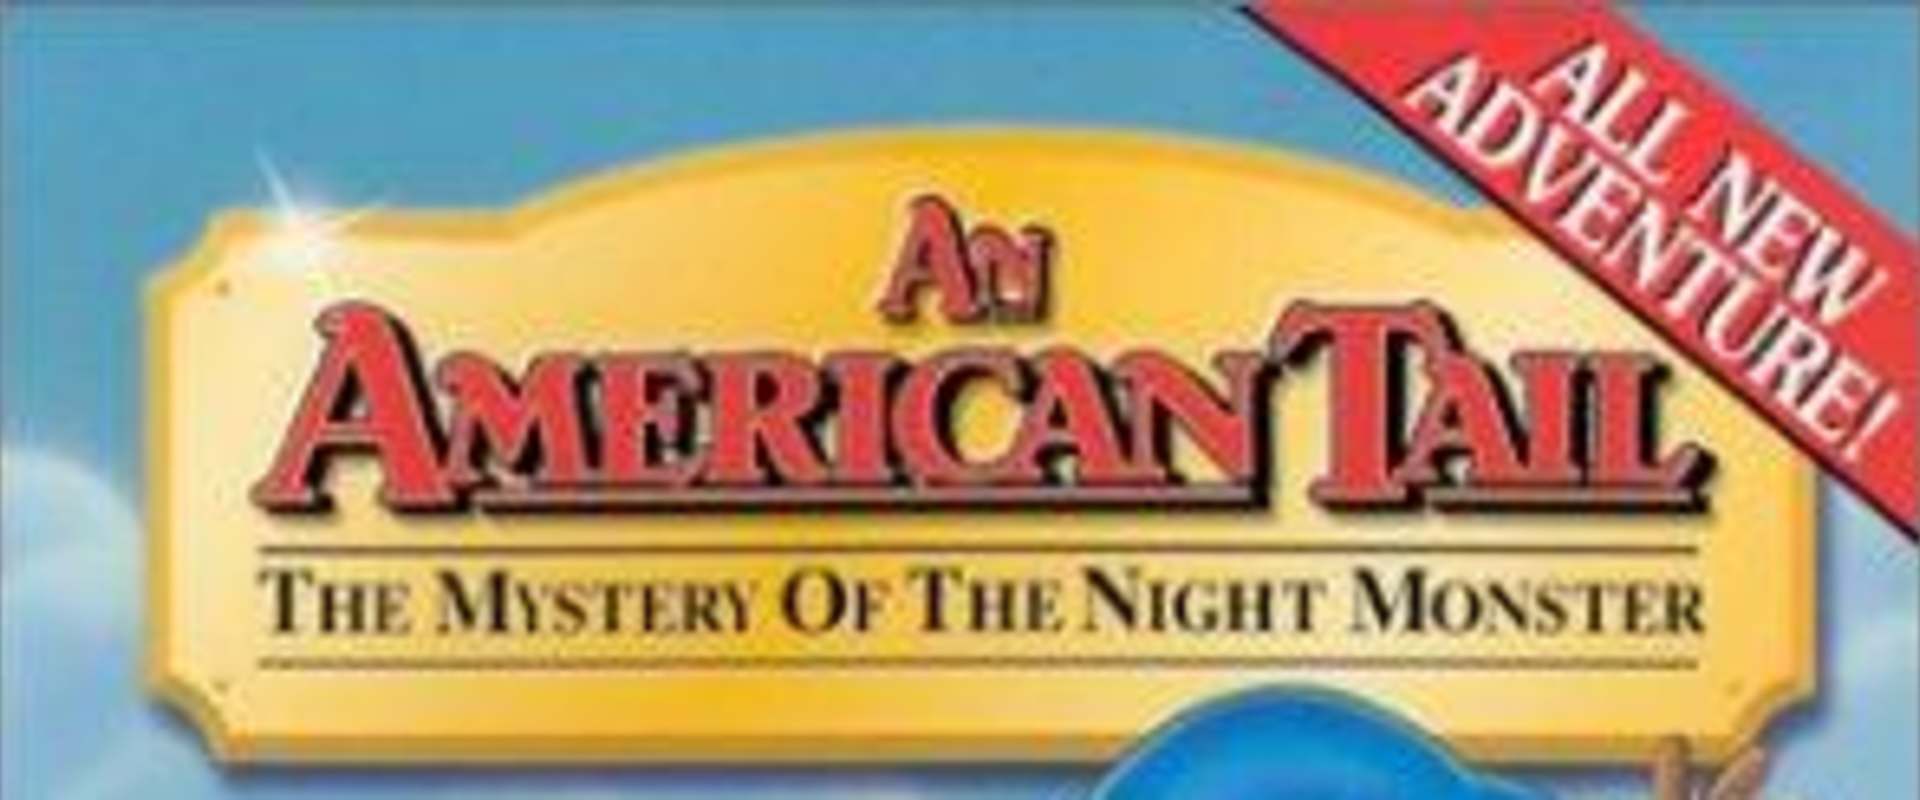 An American Tail: The Mystery of the Night Monster background 2